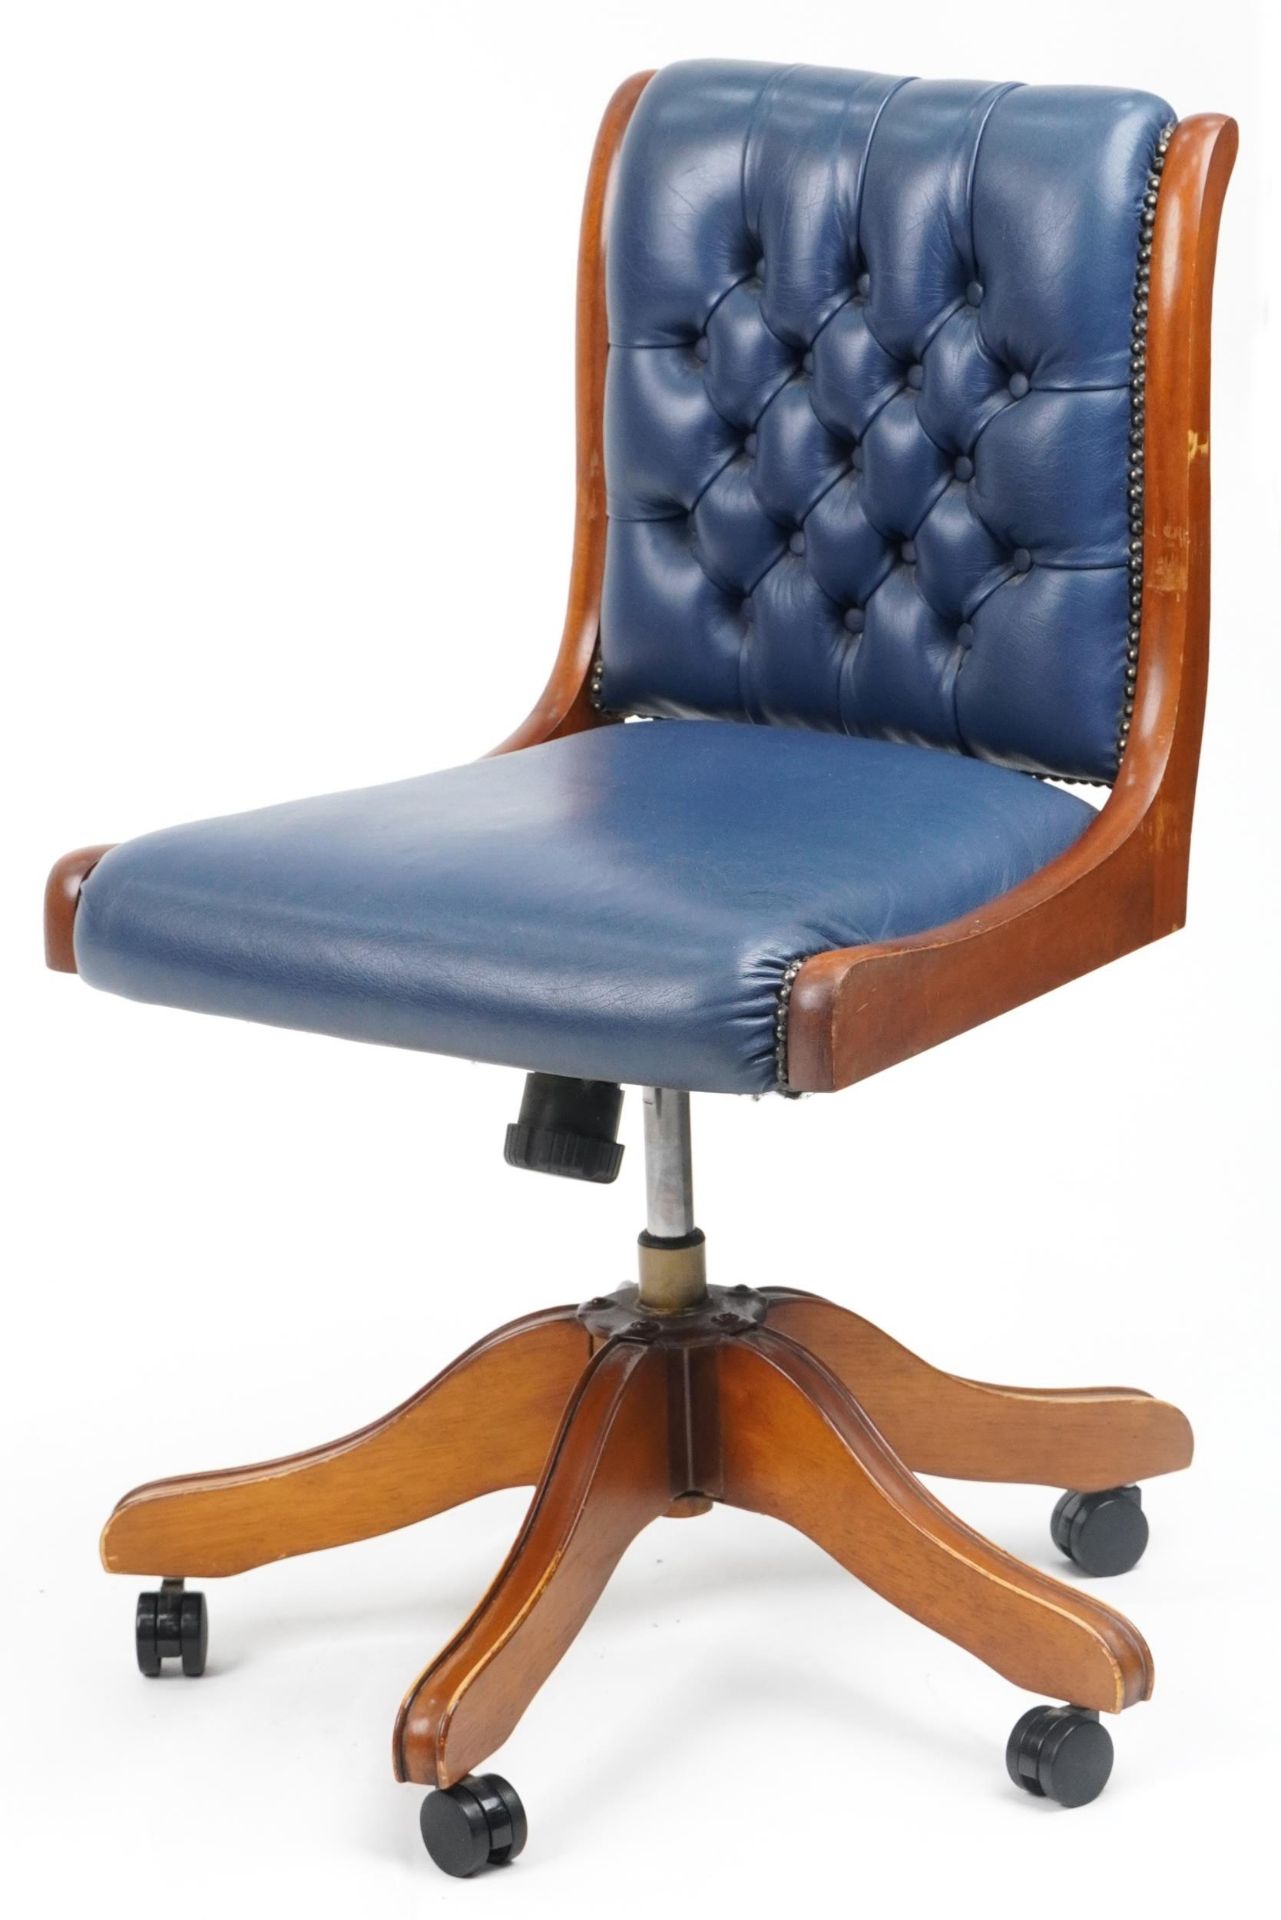 Mahogany and blue leather button back upholstered adjustable desk chair, 89cm high